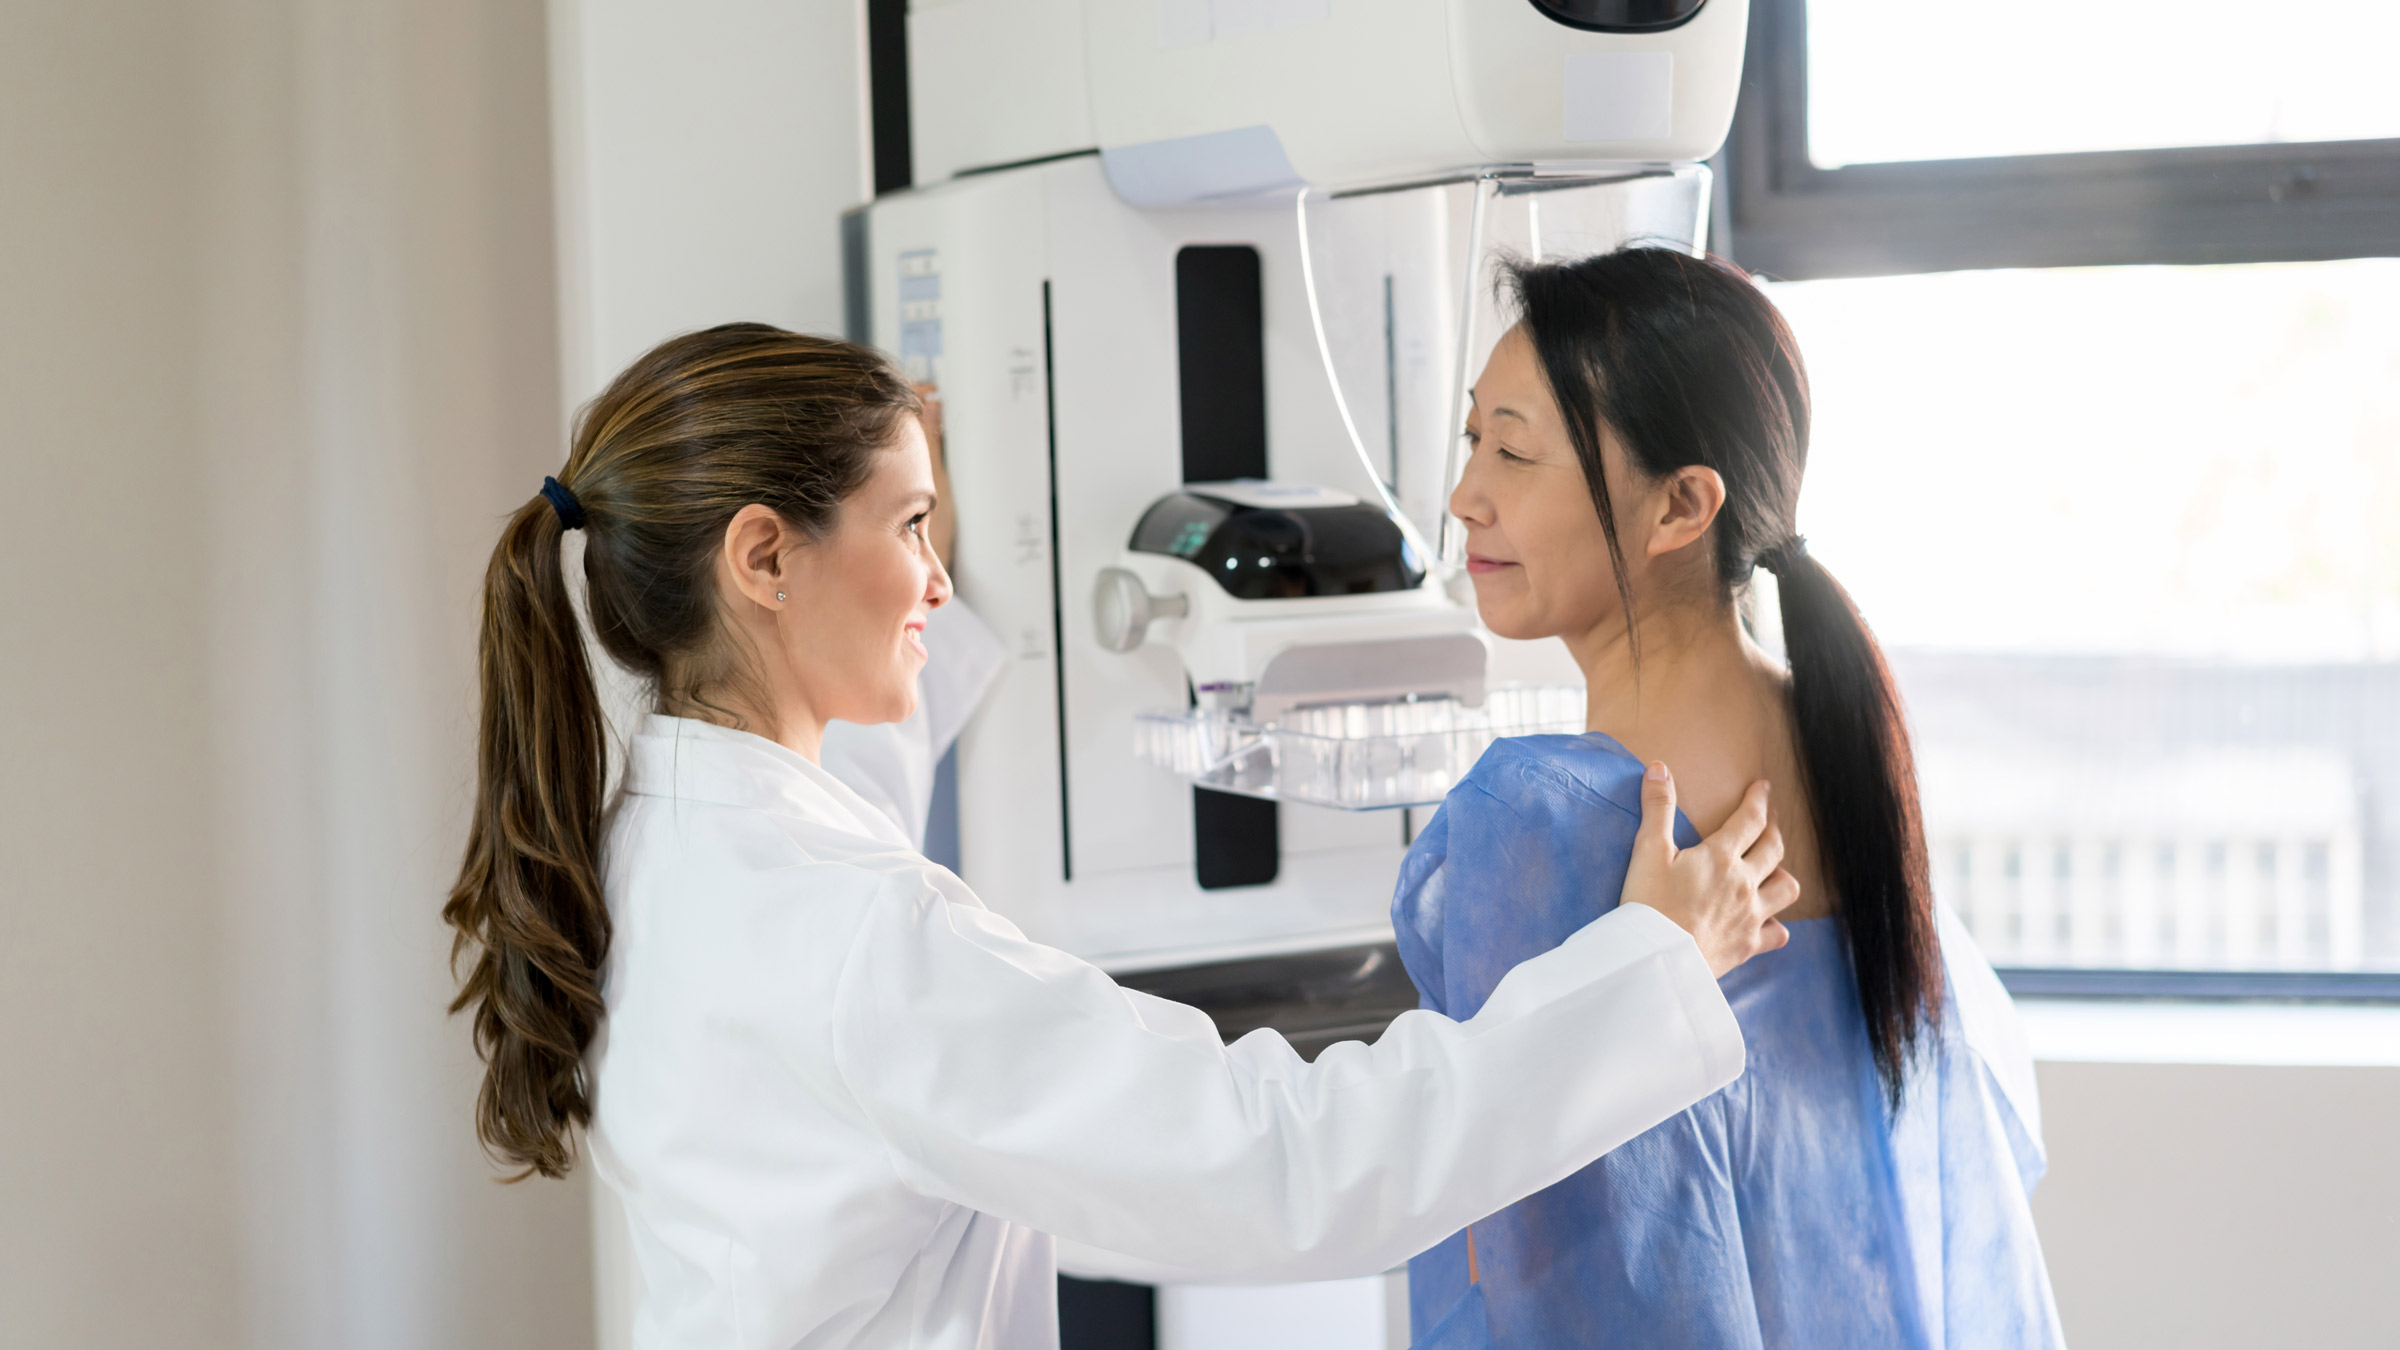 Where Can I Get Free Cancer Screenings Without Insurance? - GoodRx